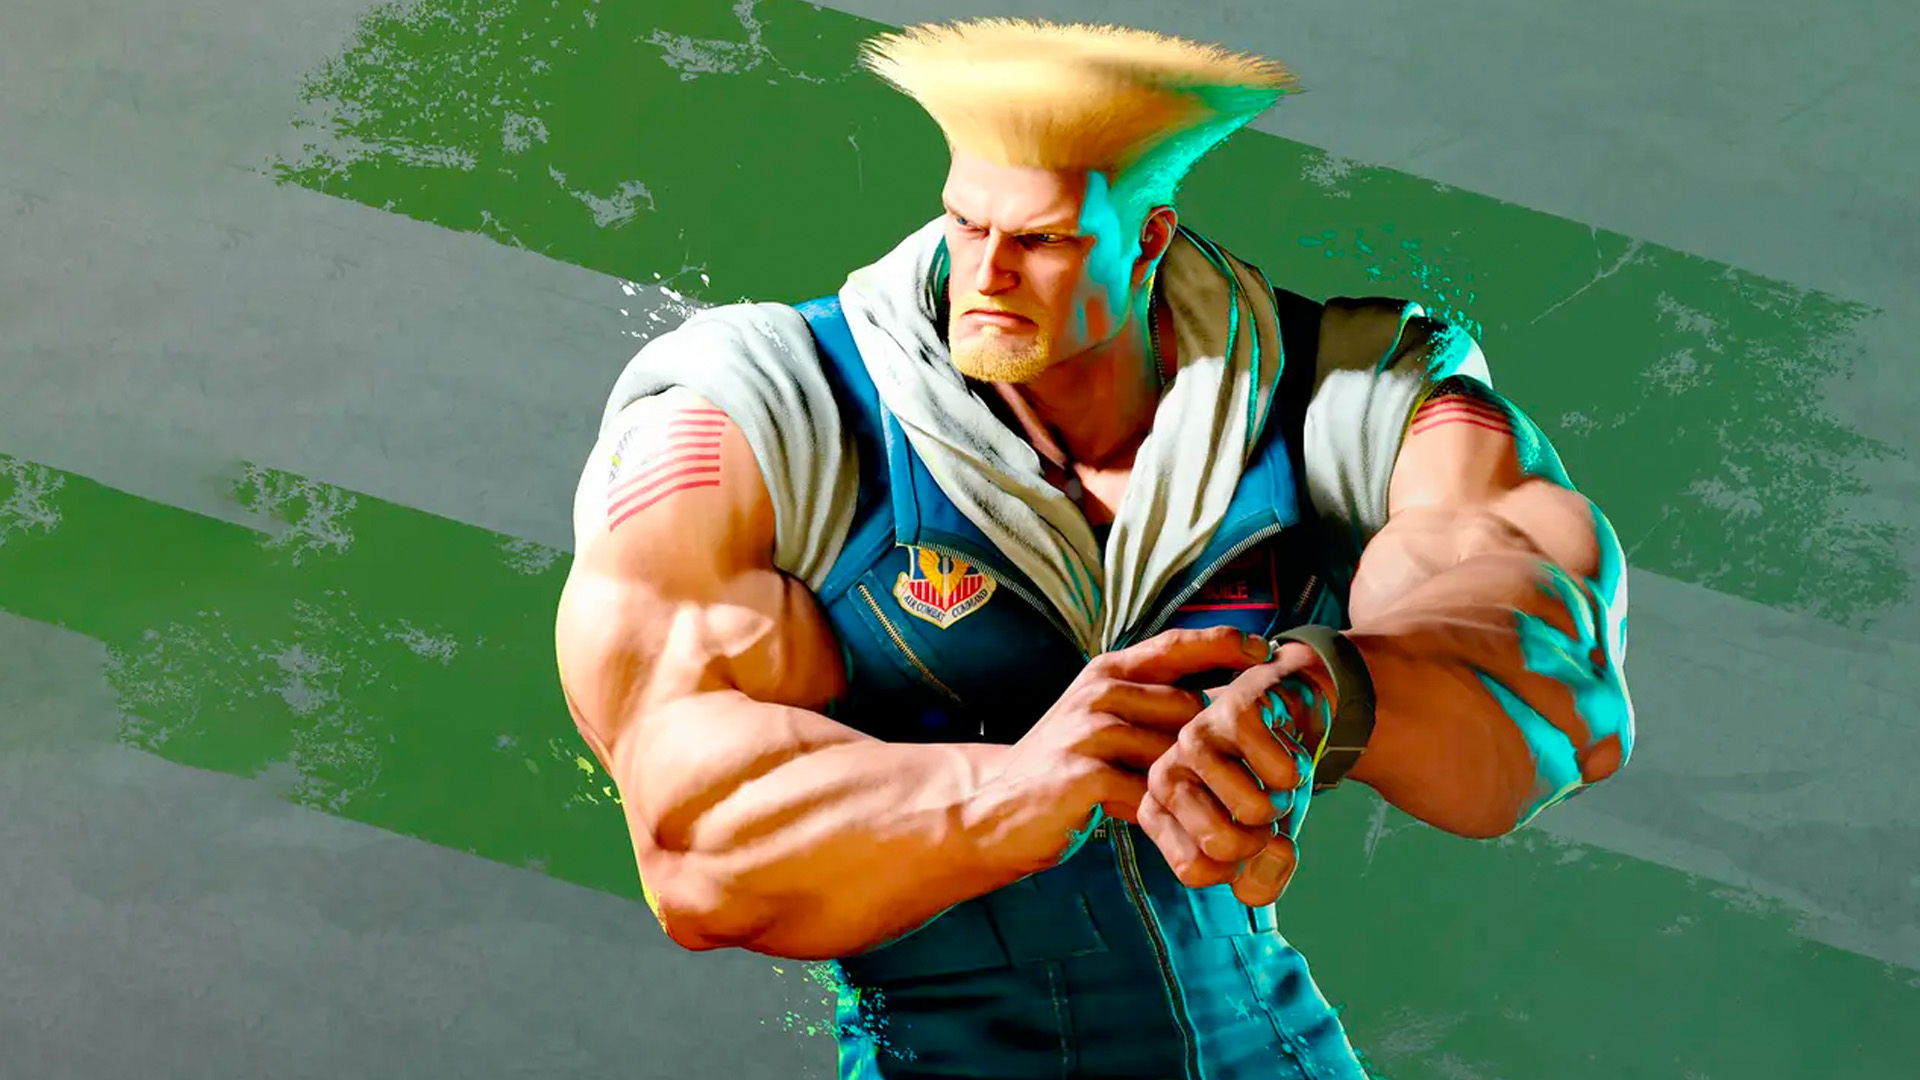 Street Fighter 6 Reveals June Release Date, Adds Three New Characters